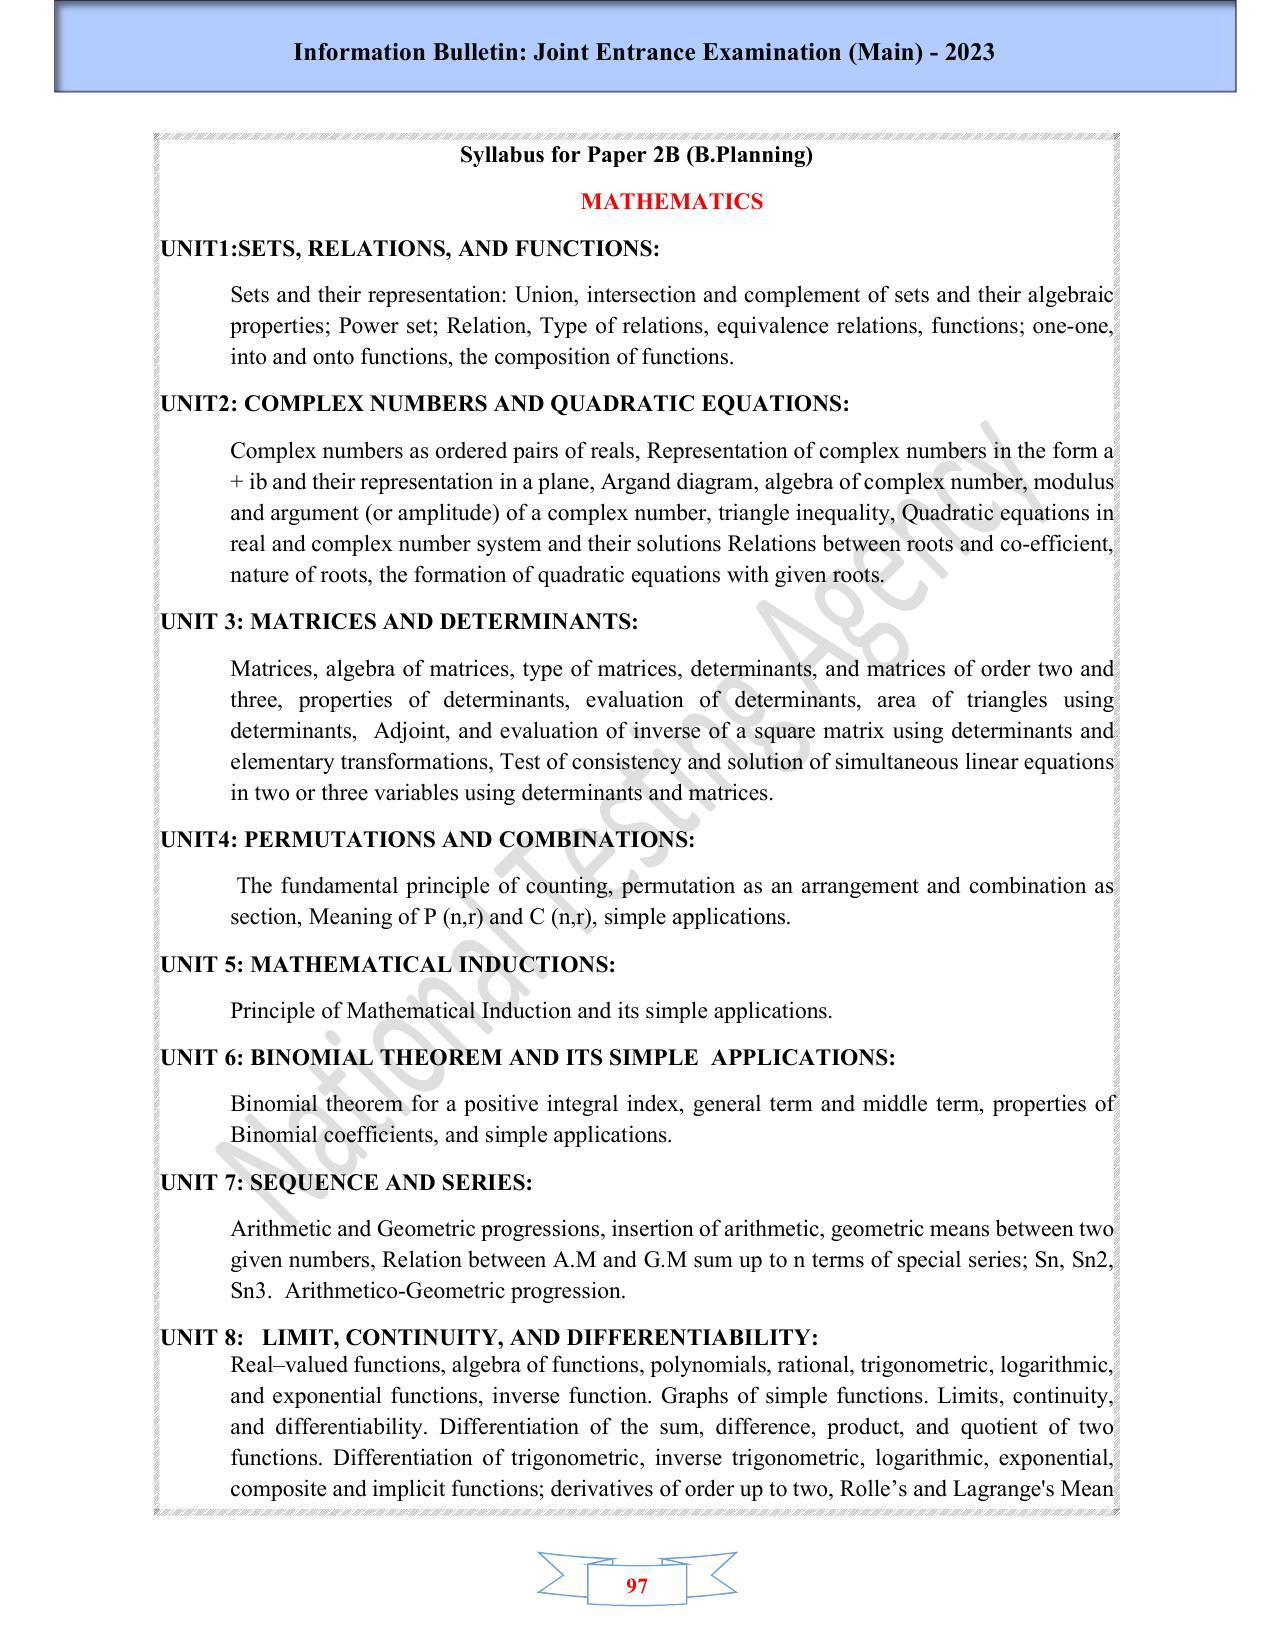 JEE Main 2023 Session 2 - Page 99